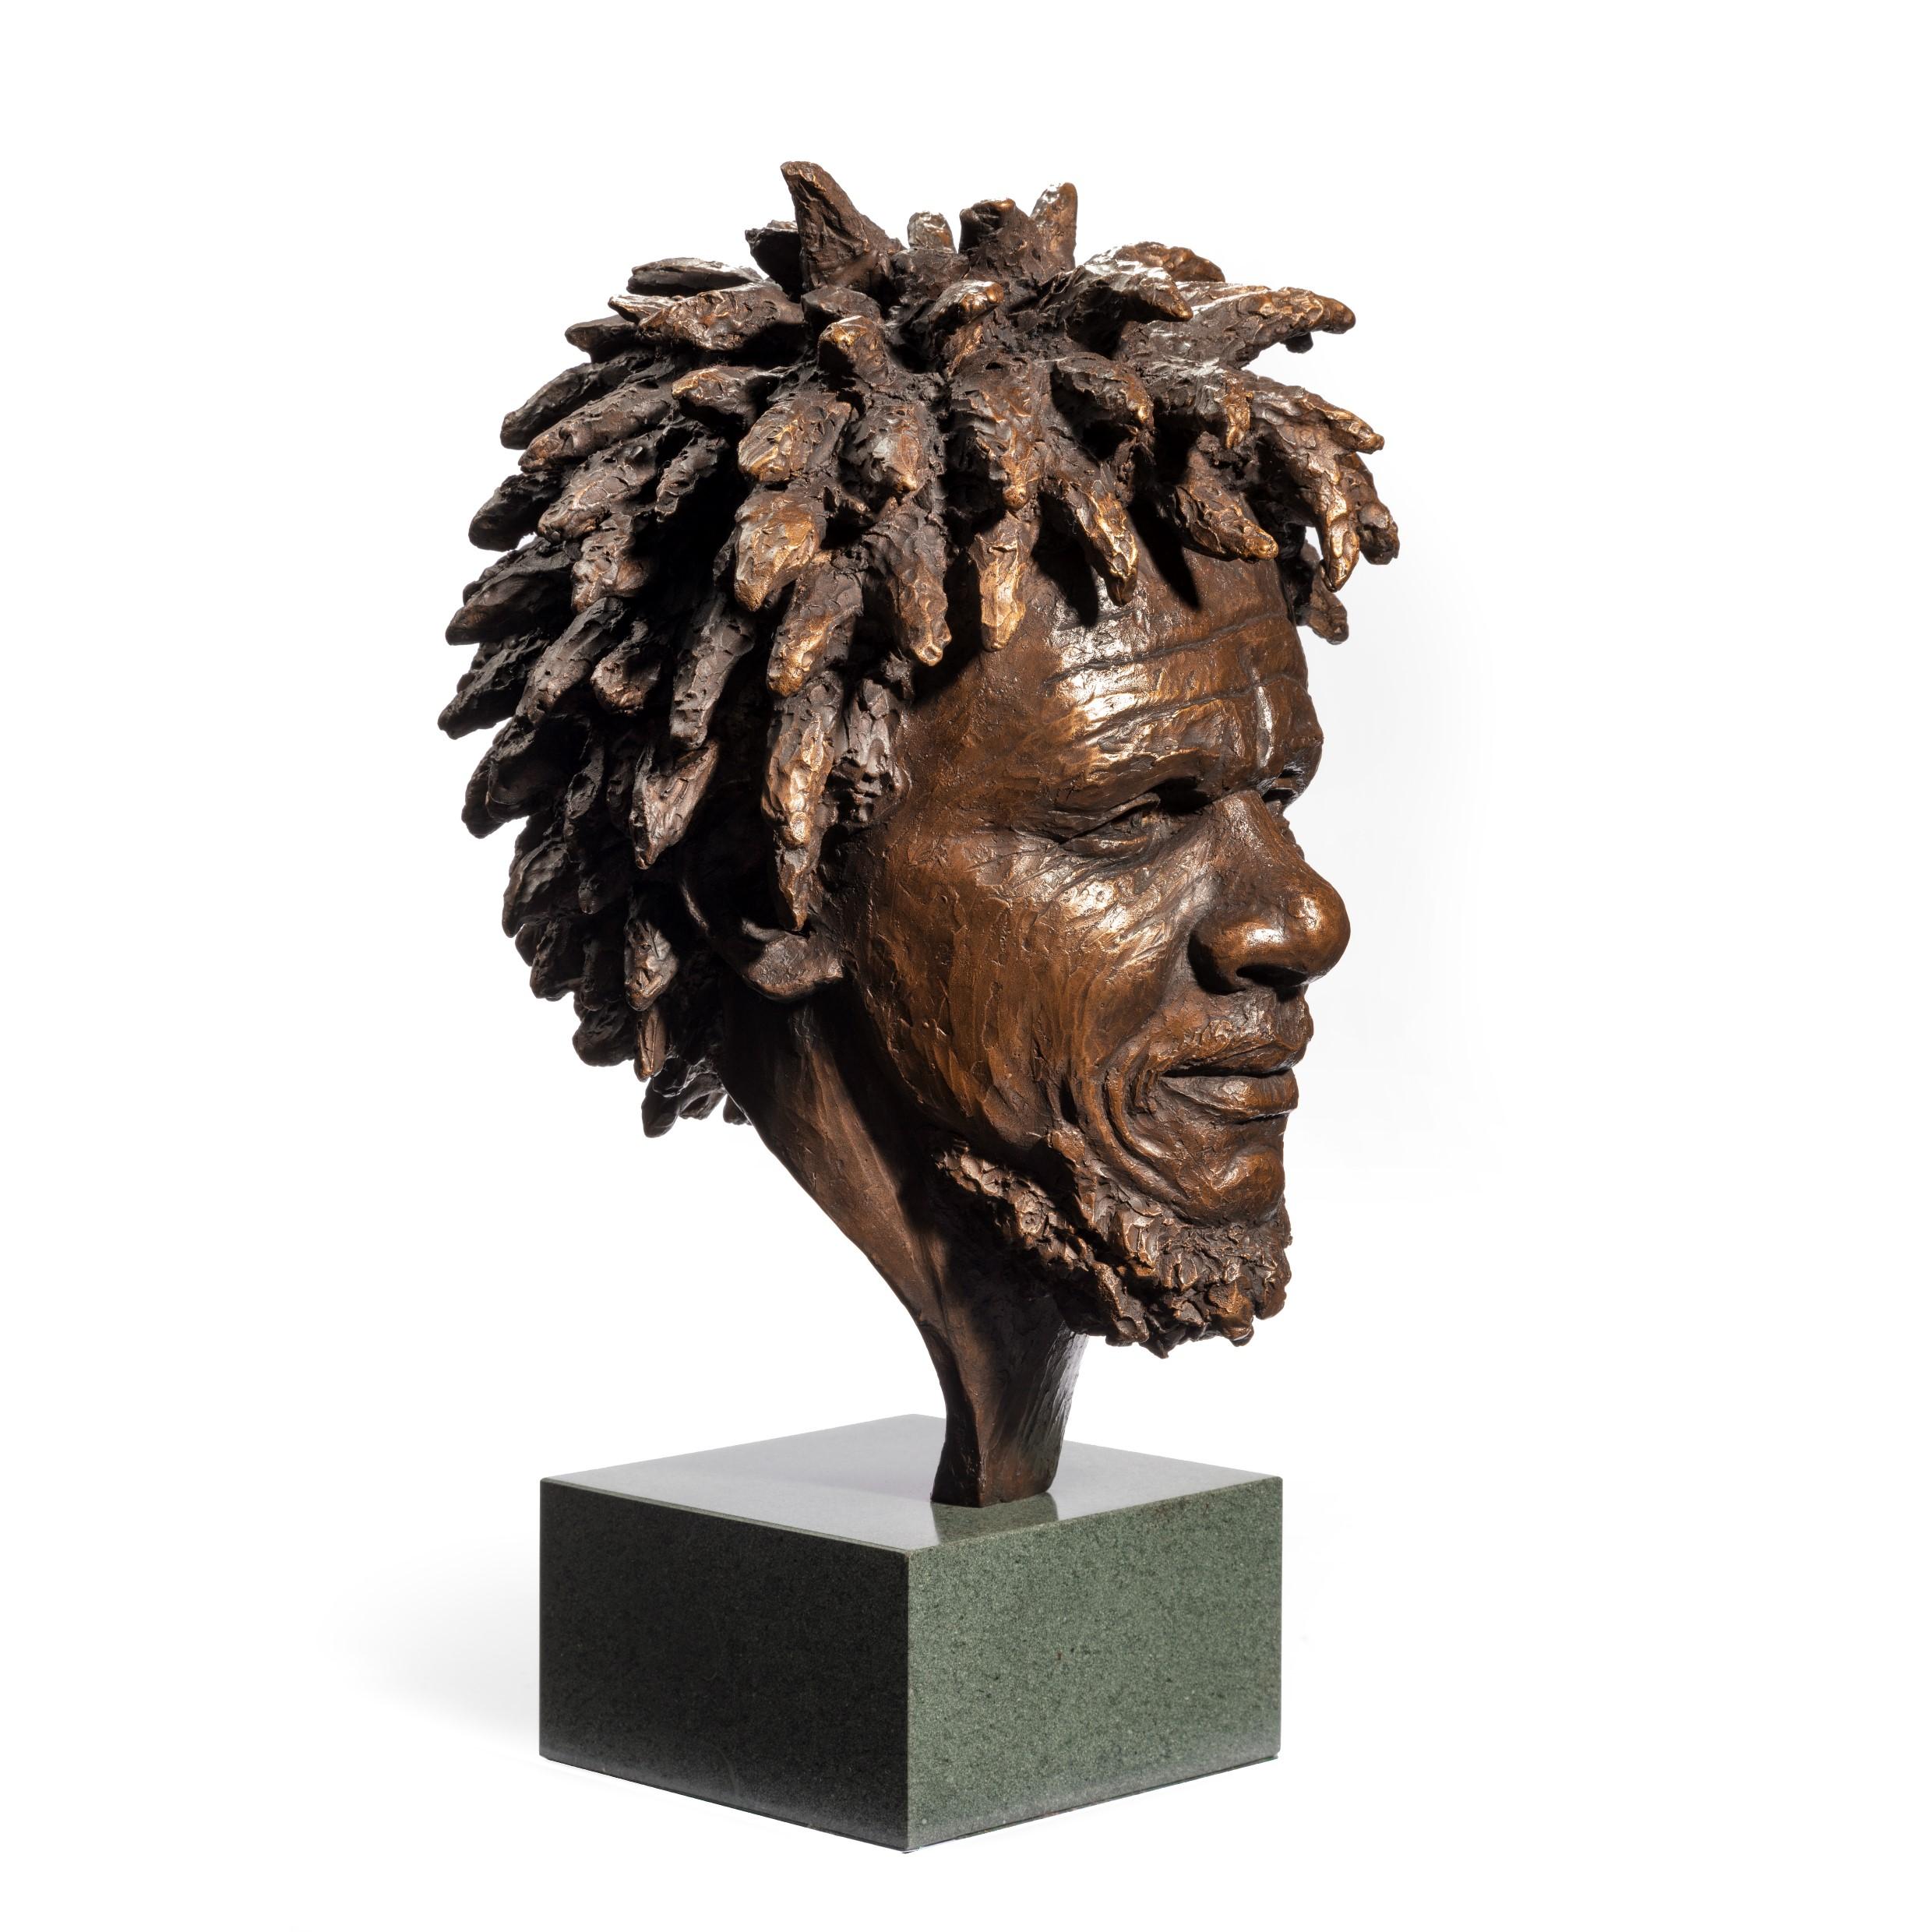 A fine bronze bust of ‘Dougie’ by Vivian Mallock depicting the head and smiling face of a Vincentian calypso singer with a dark patination becoming lighter at the end of his dreadlocks. Signed, 2/9. English, 2000.